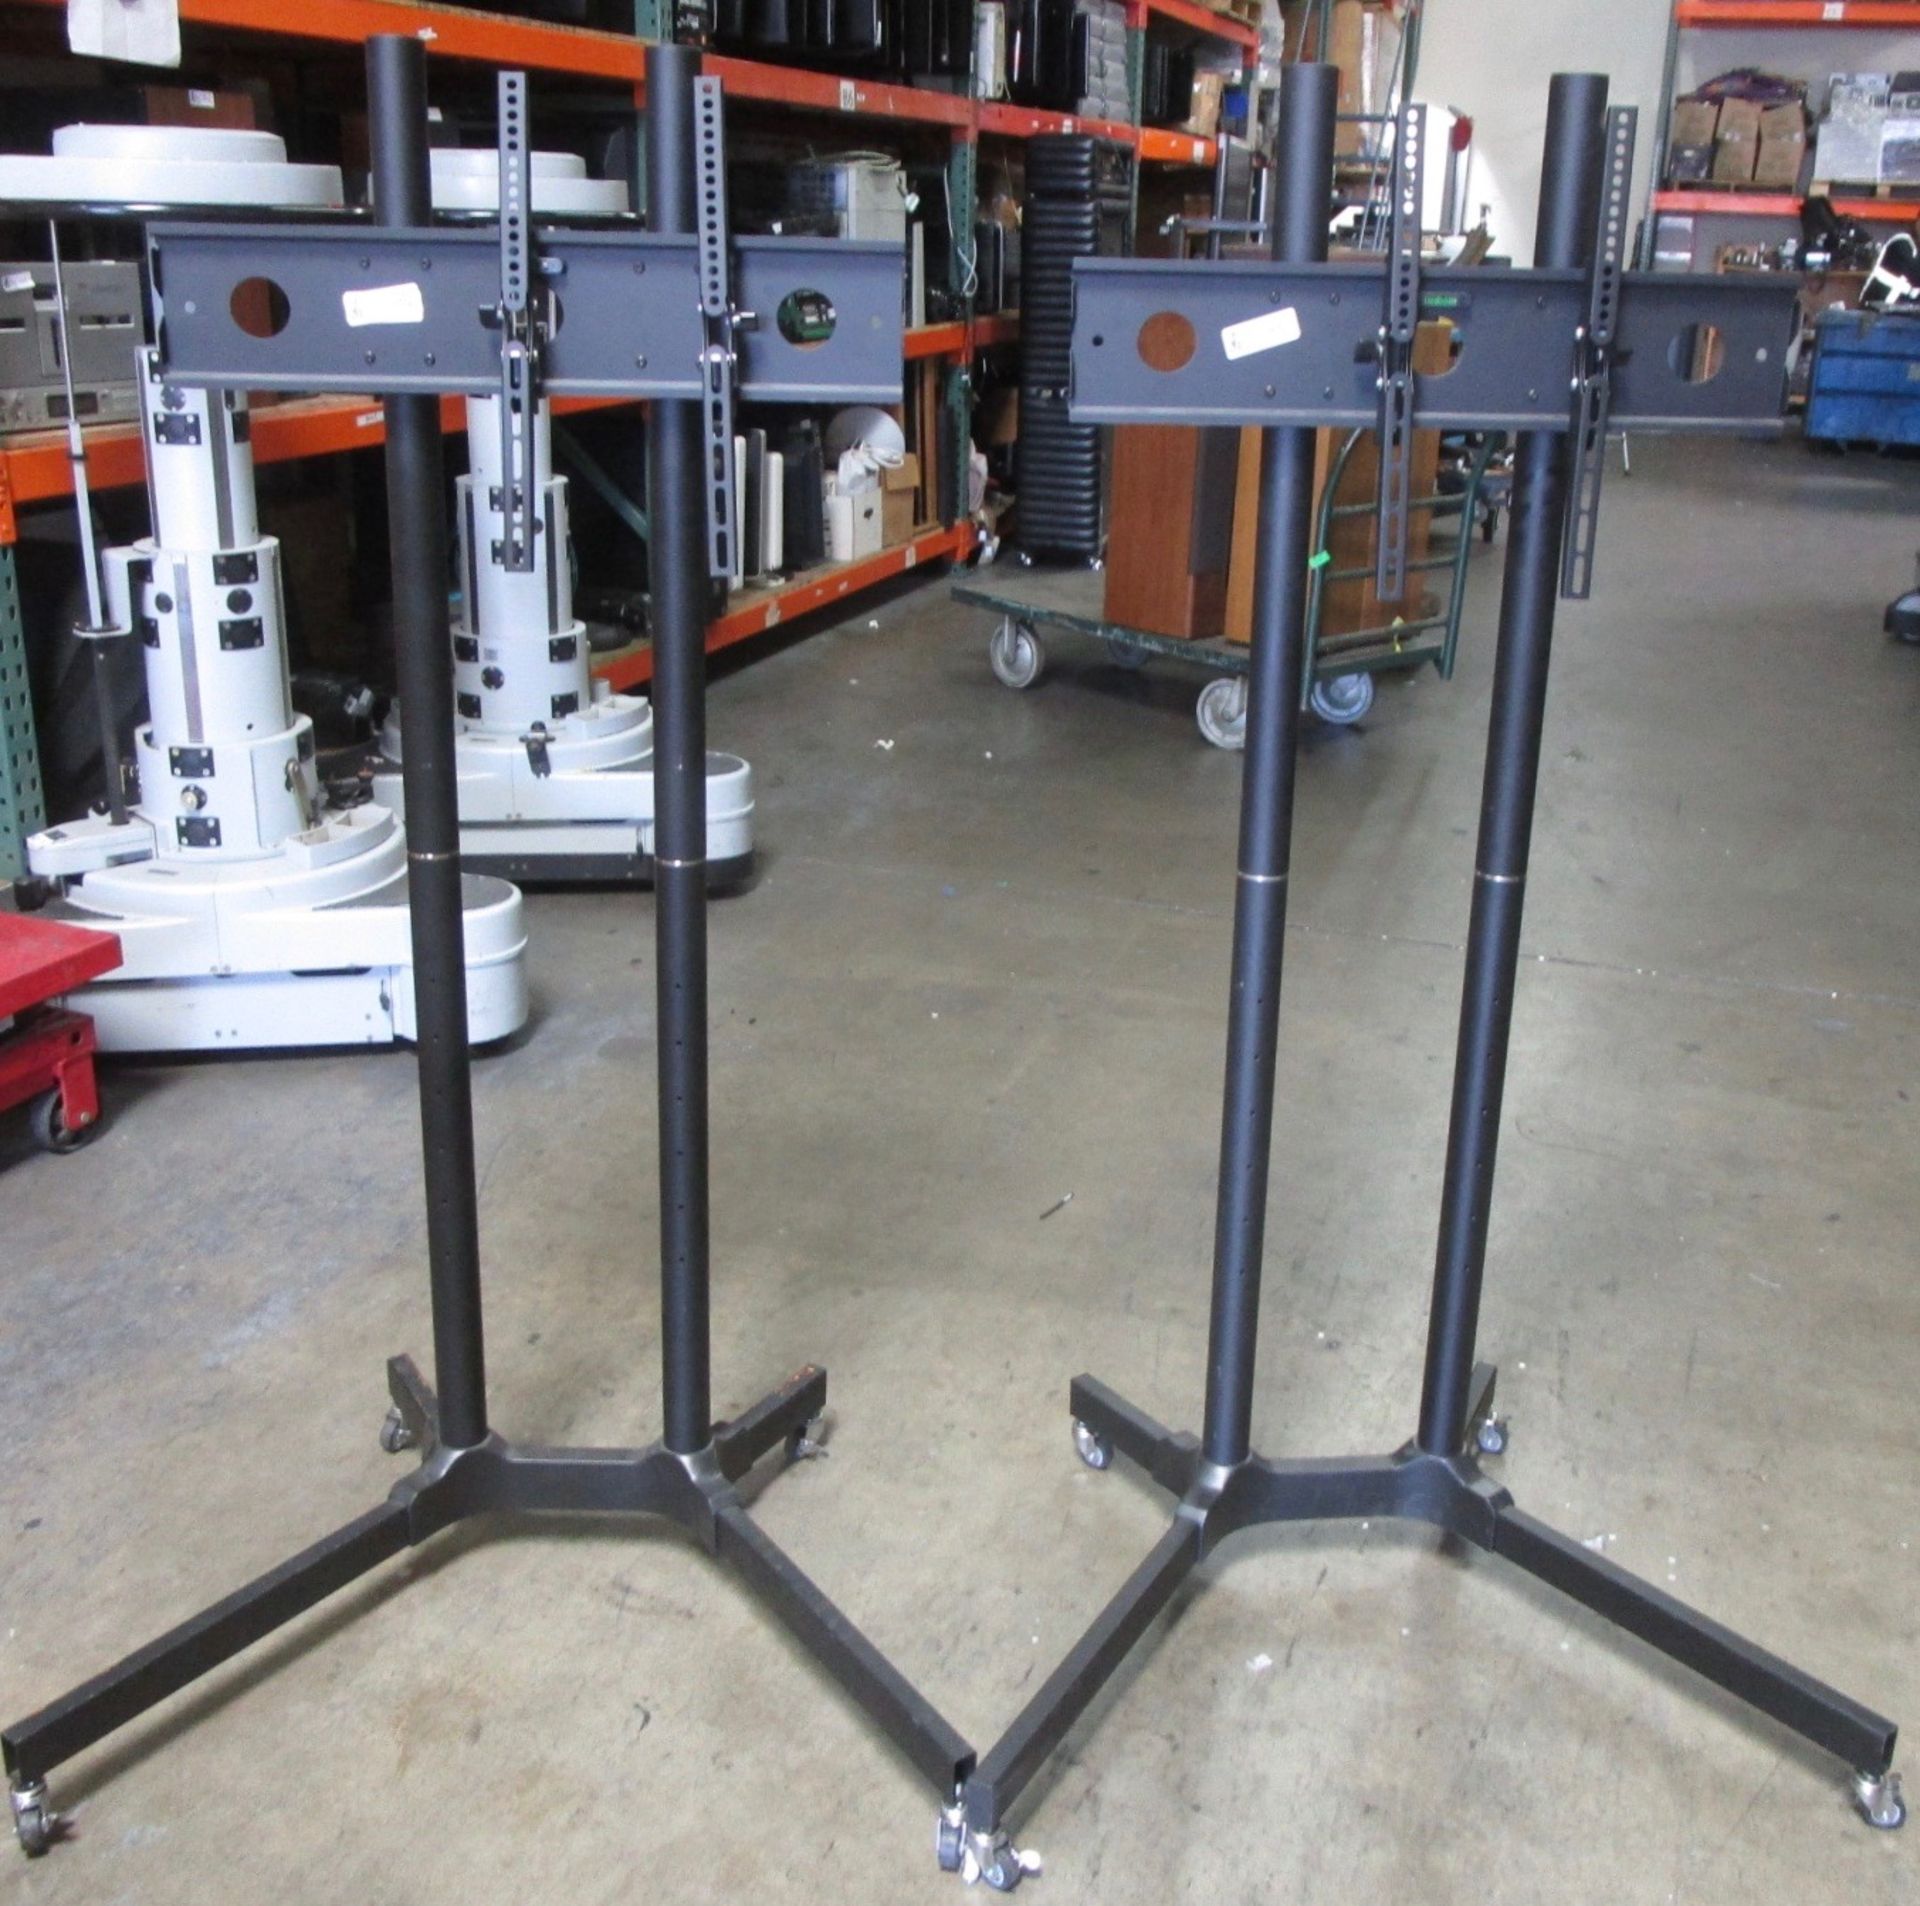 LOT OF 2 ROLLING EQUIPMENT STANDS (60" HIGH)